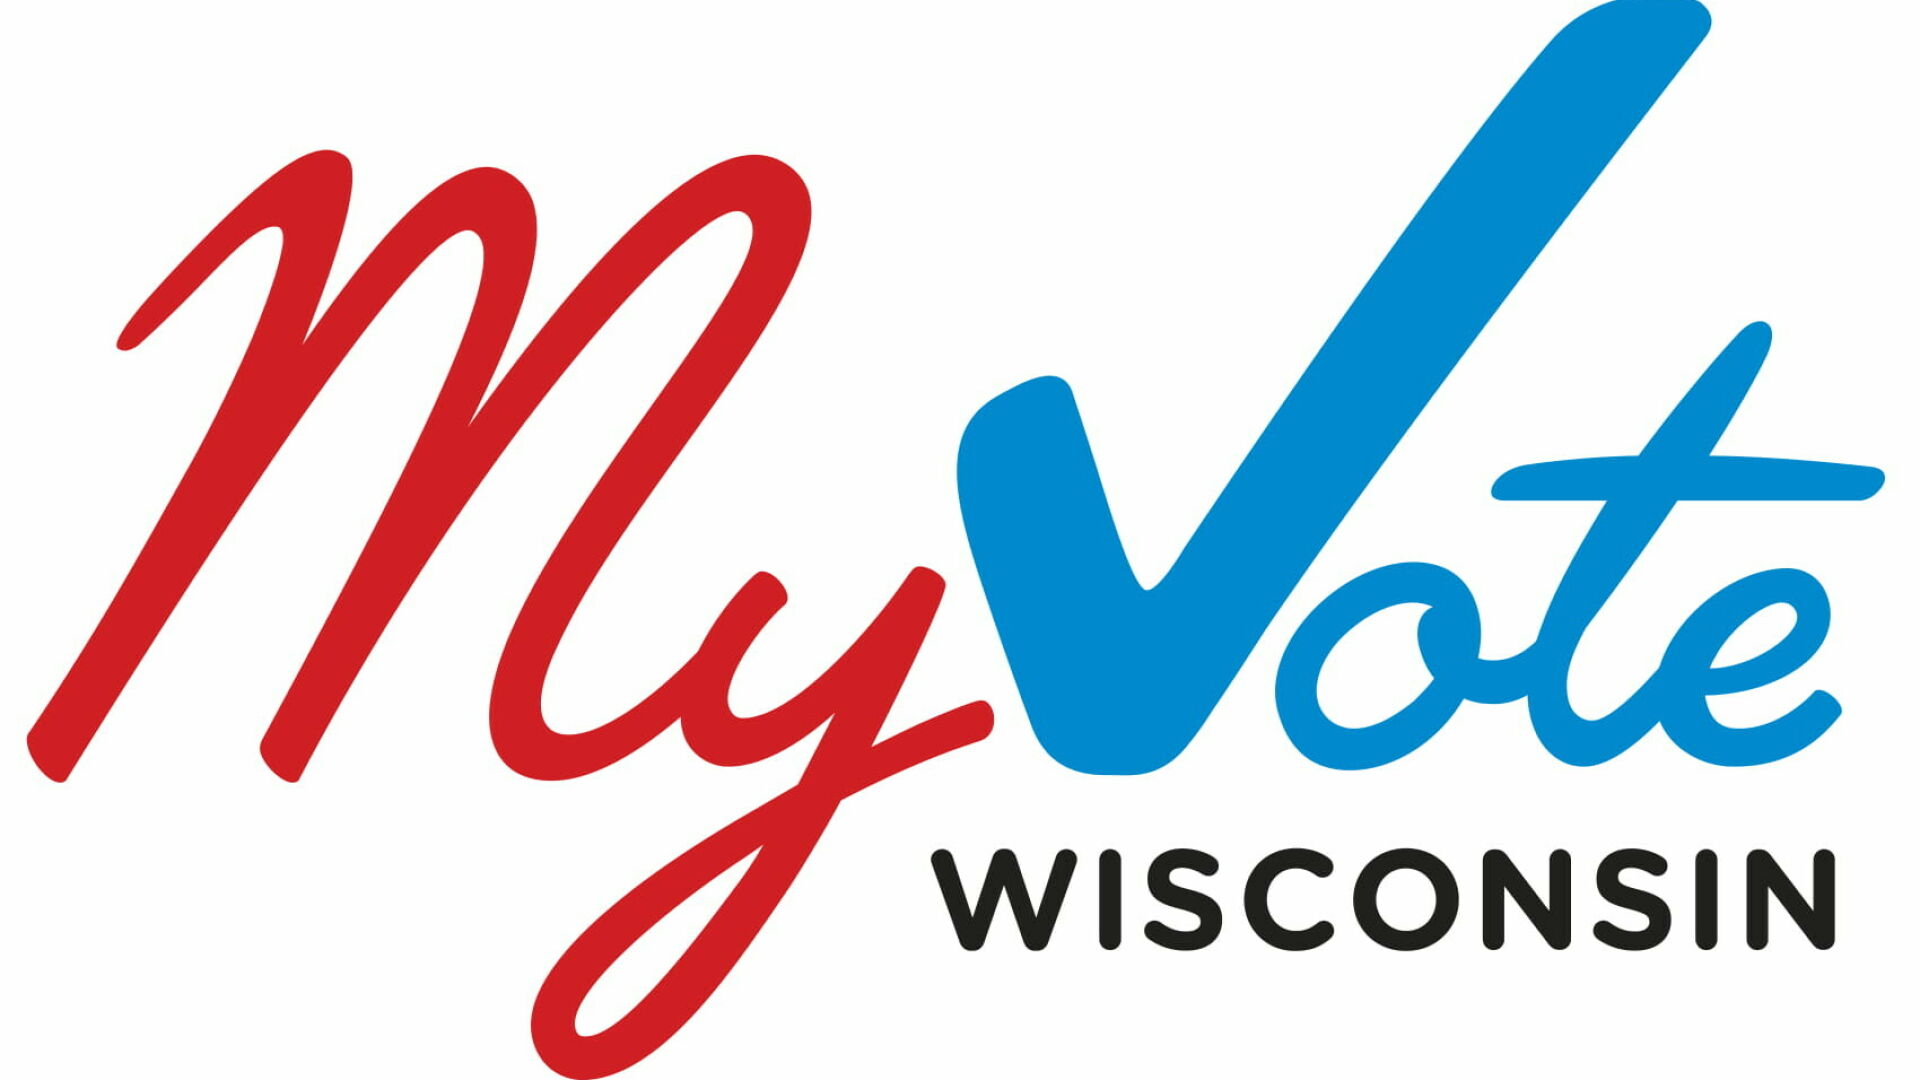 Wisconsin primary and strategic voting